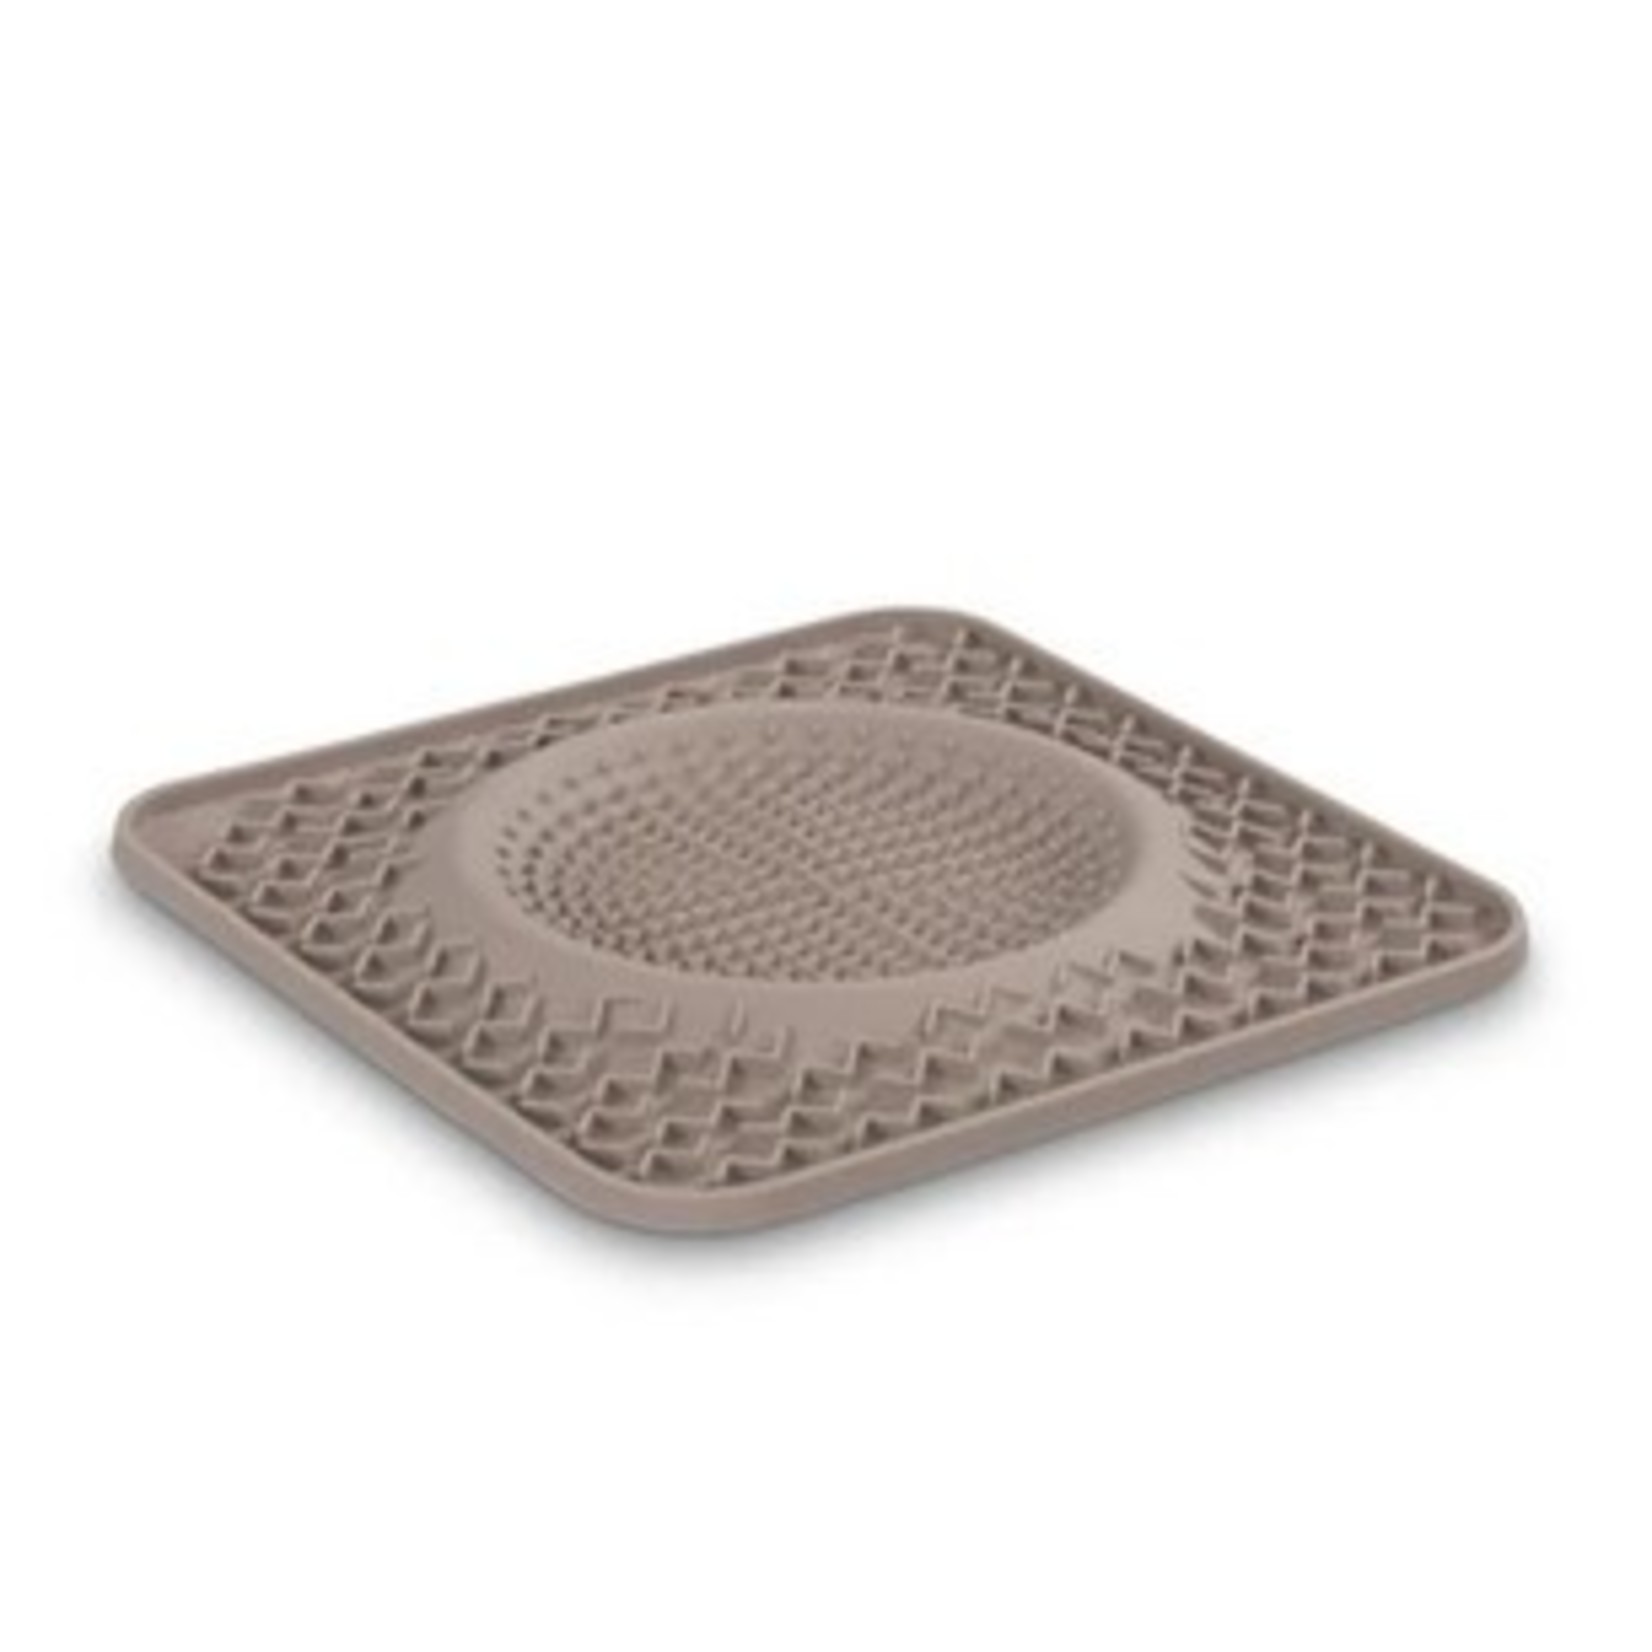 Messy Mutts MESSY MUTTS Silicone Lick Mat Bowl 10x10